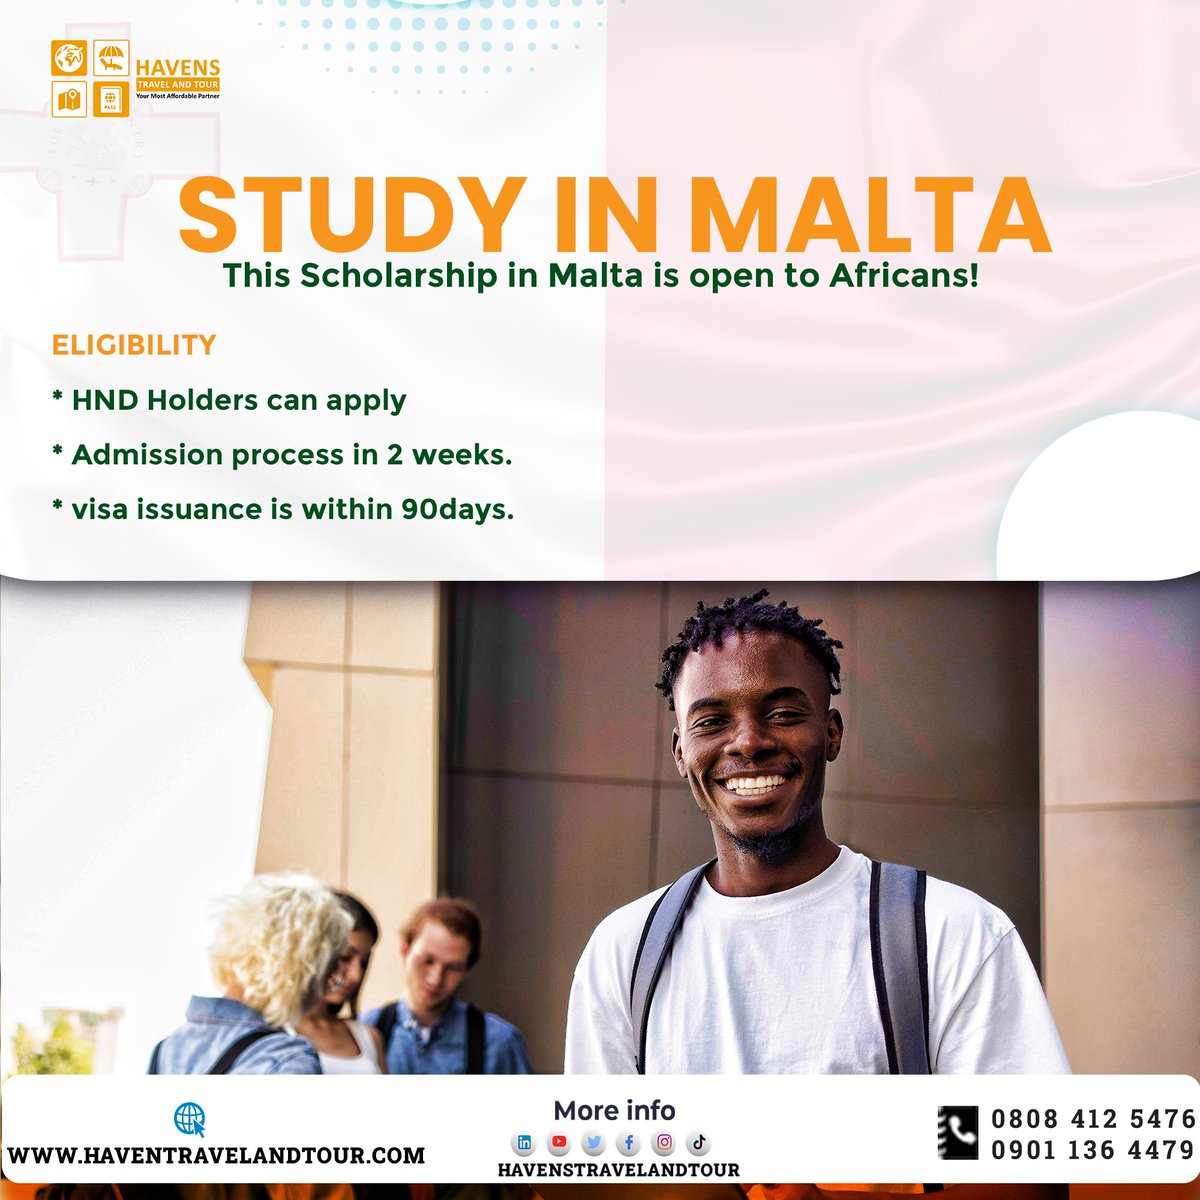 Study in Malta 🇲🇹

 This Scholarship in Malta is open to Africans!

- HND Holders can apply
- Admission process in 2 weeks.
- visa issuance is within 90 days.

If interested, please send us a DM.

#studyabroad